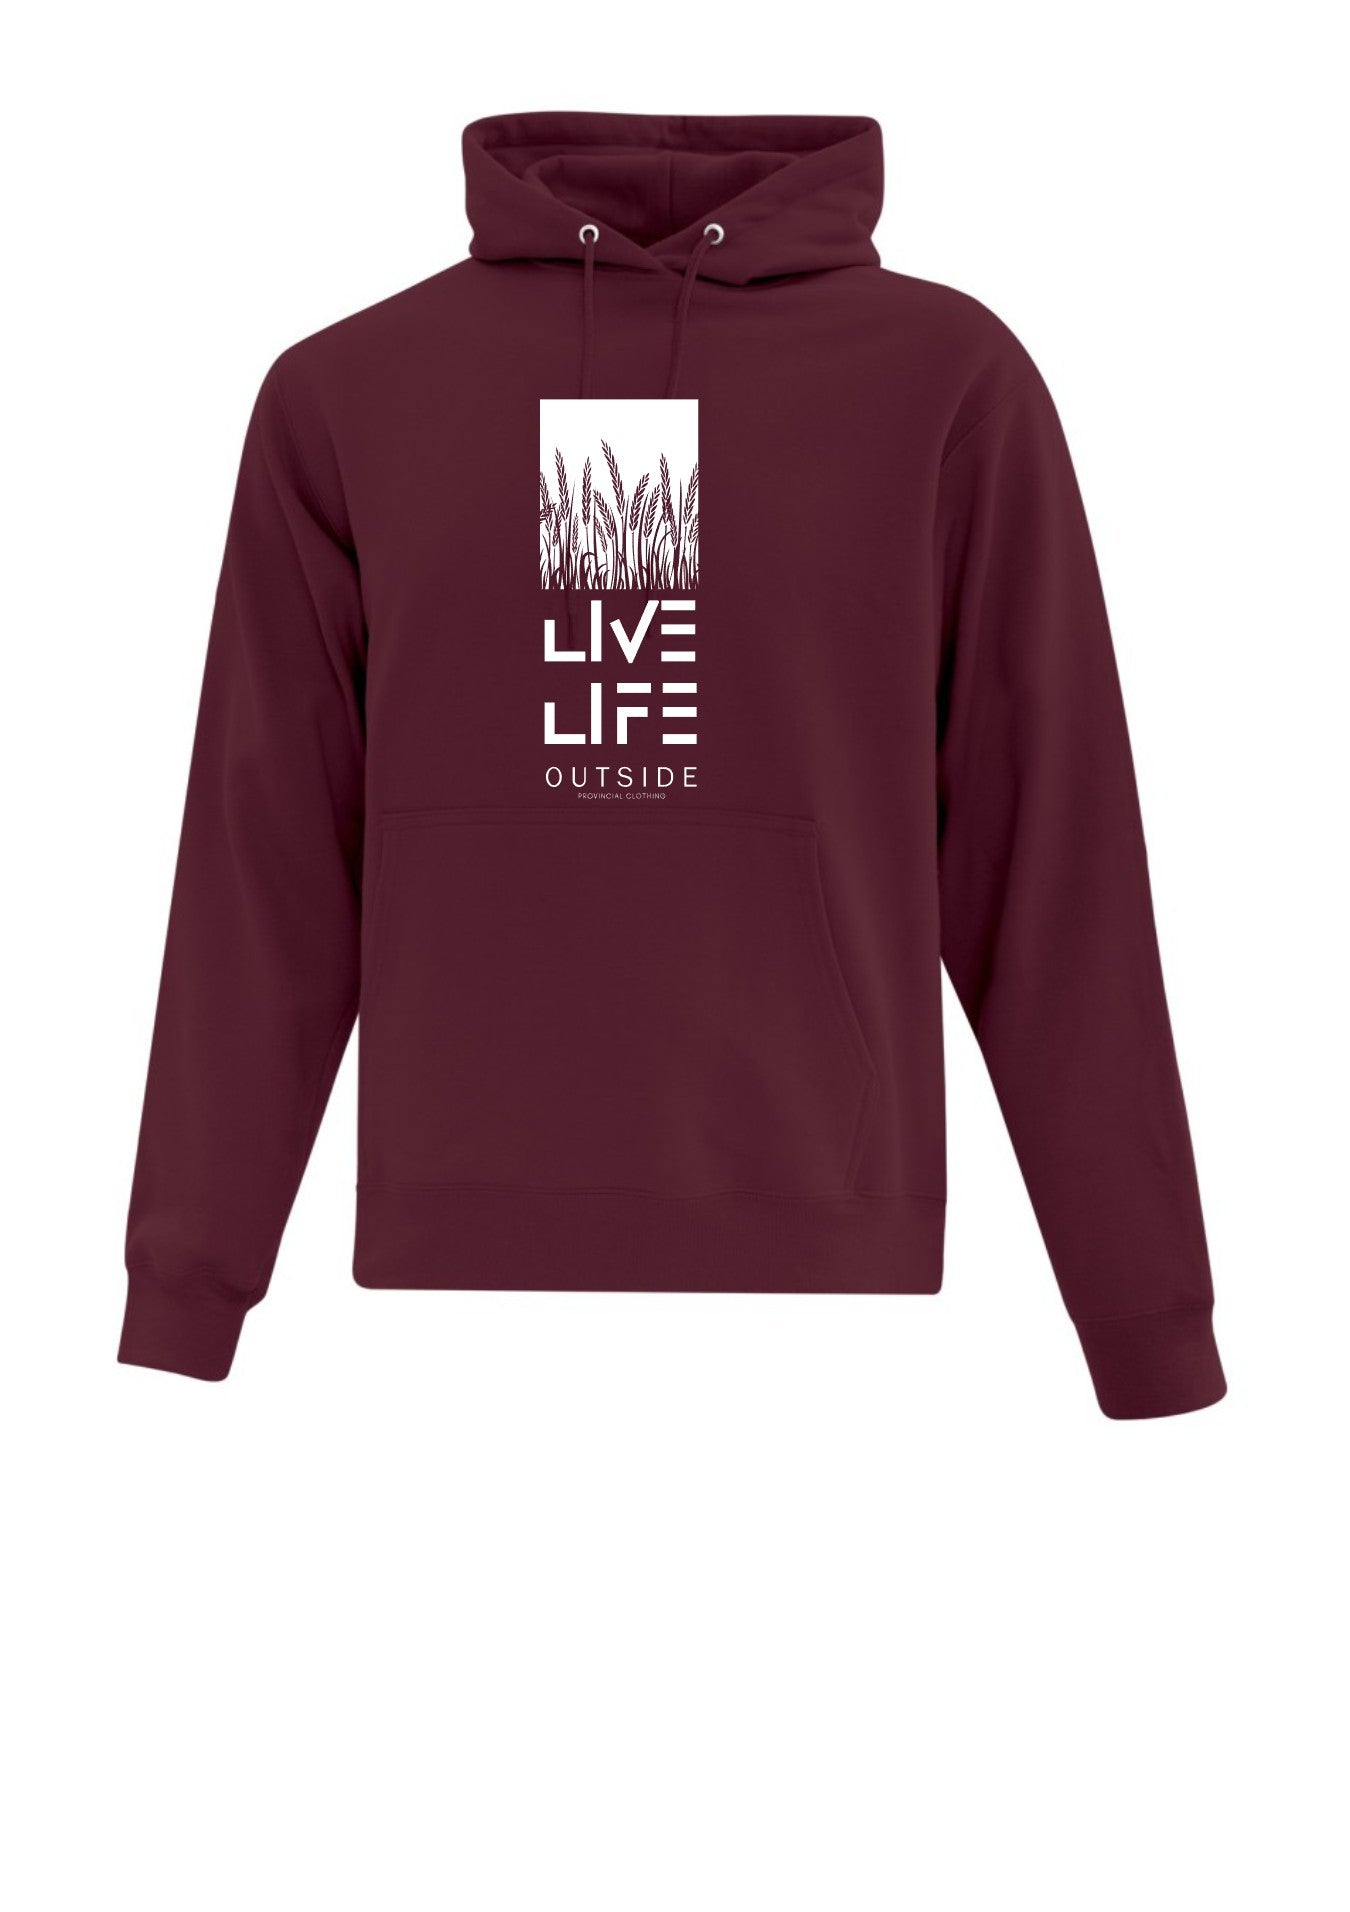 Live Life Outside- WHEAT Hoodie *Brand New* – Provincial Clothing